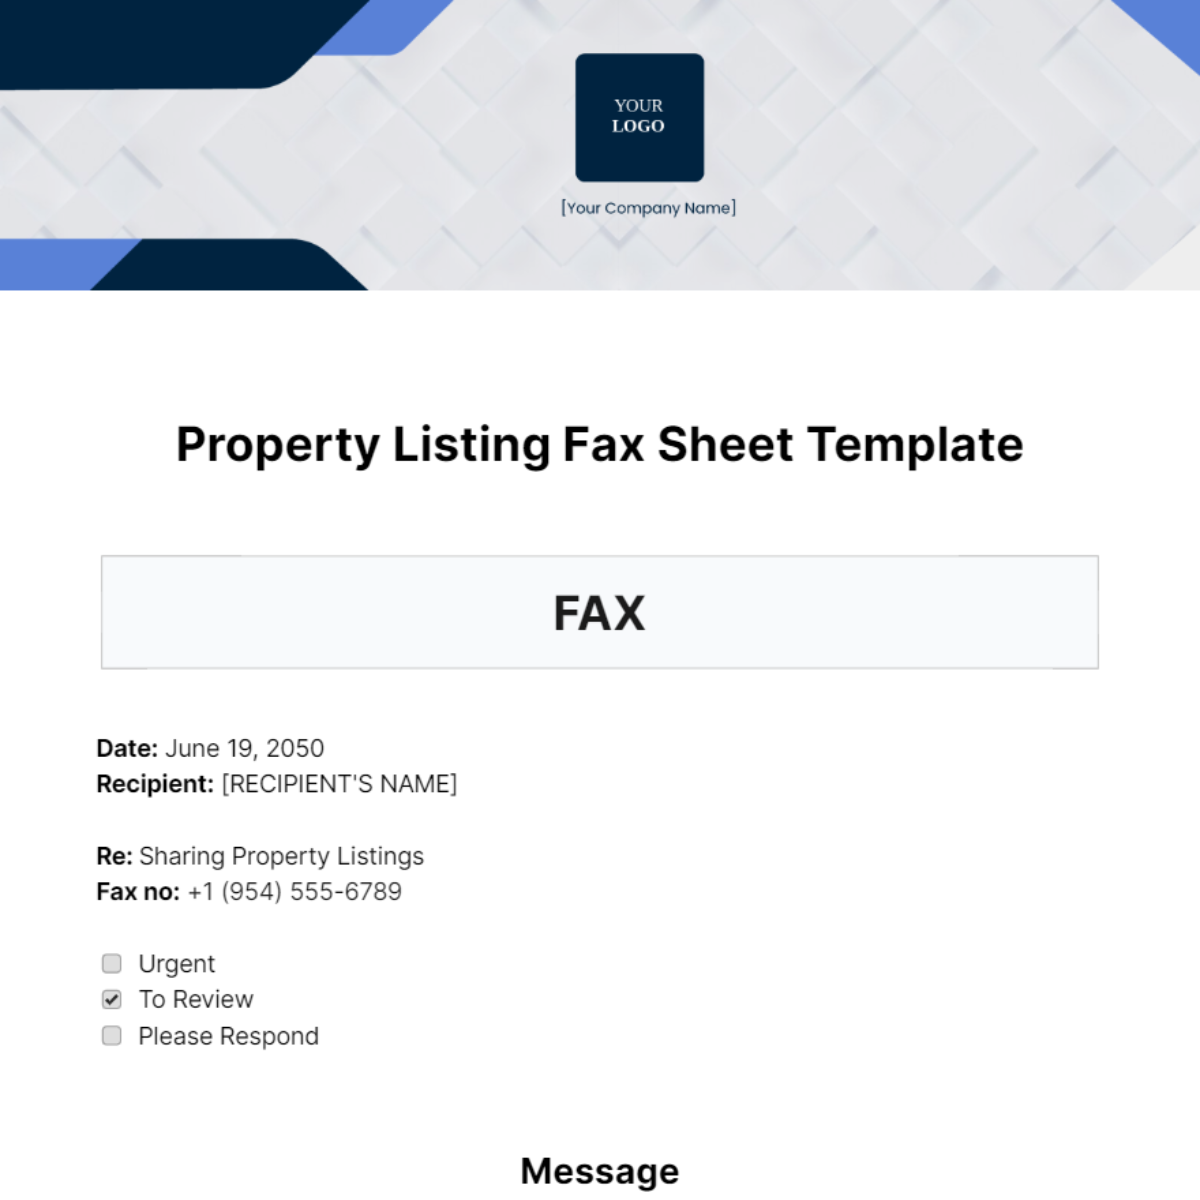 Property Listing Fax Sheet Template